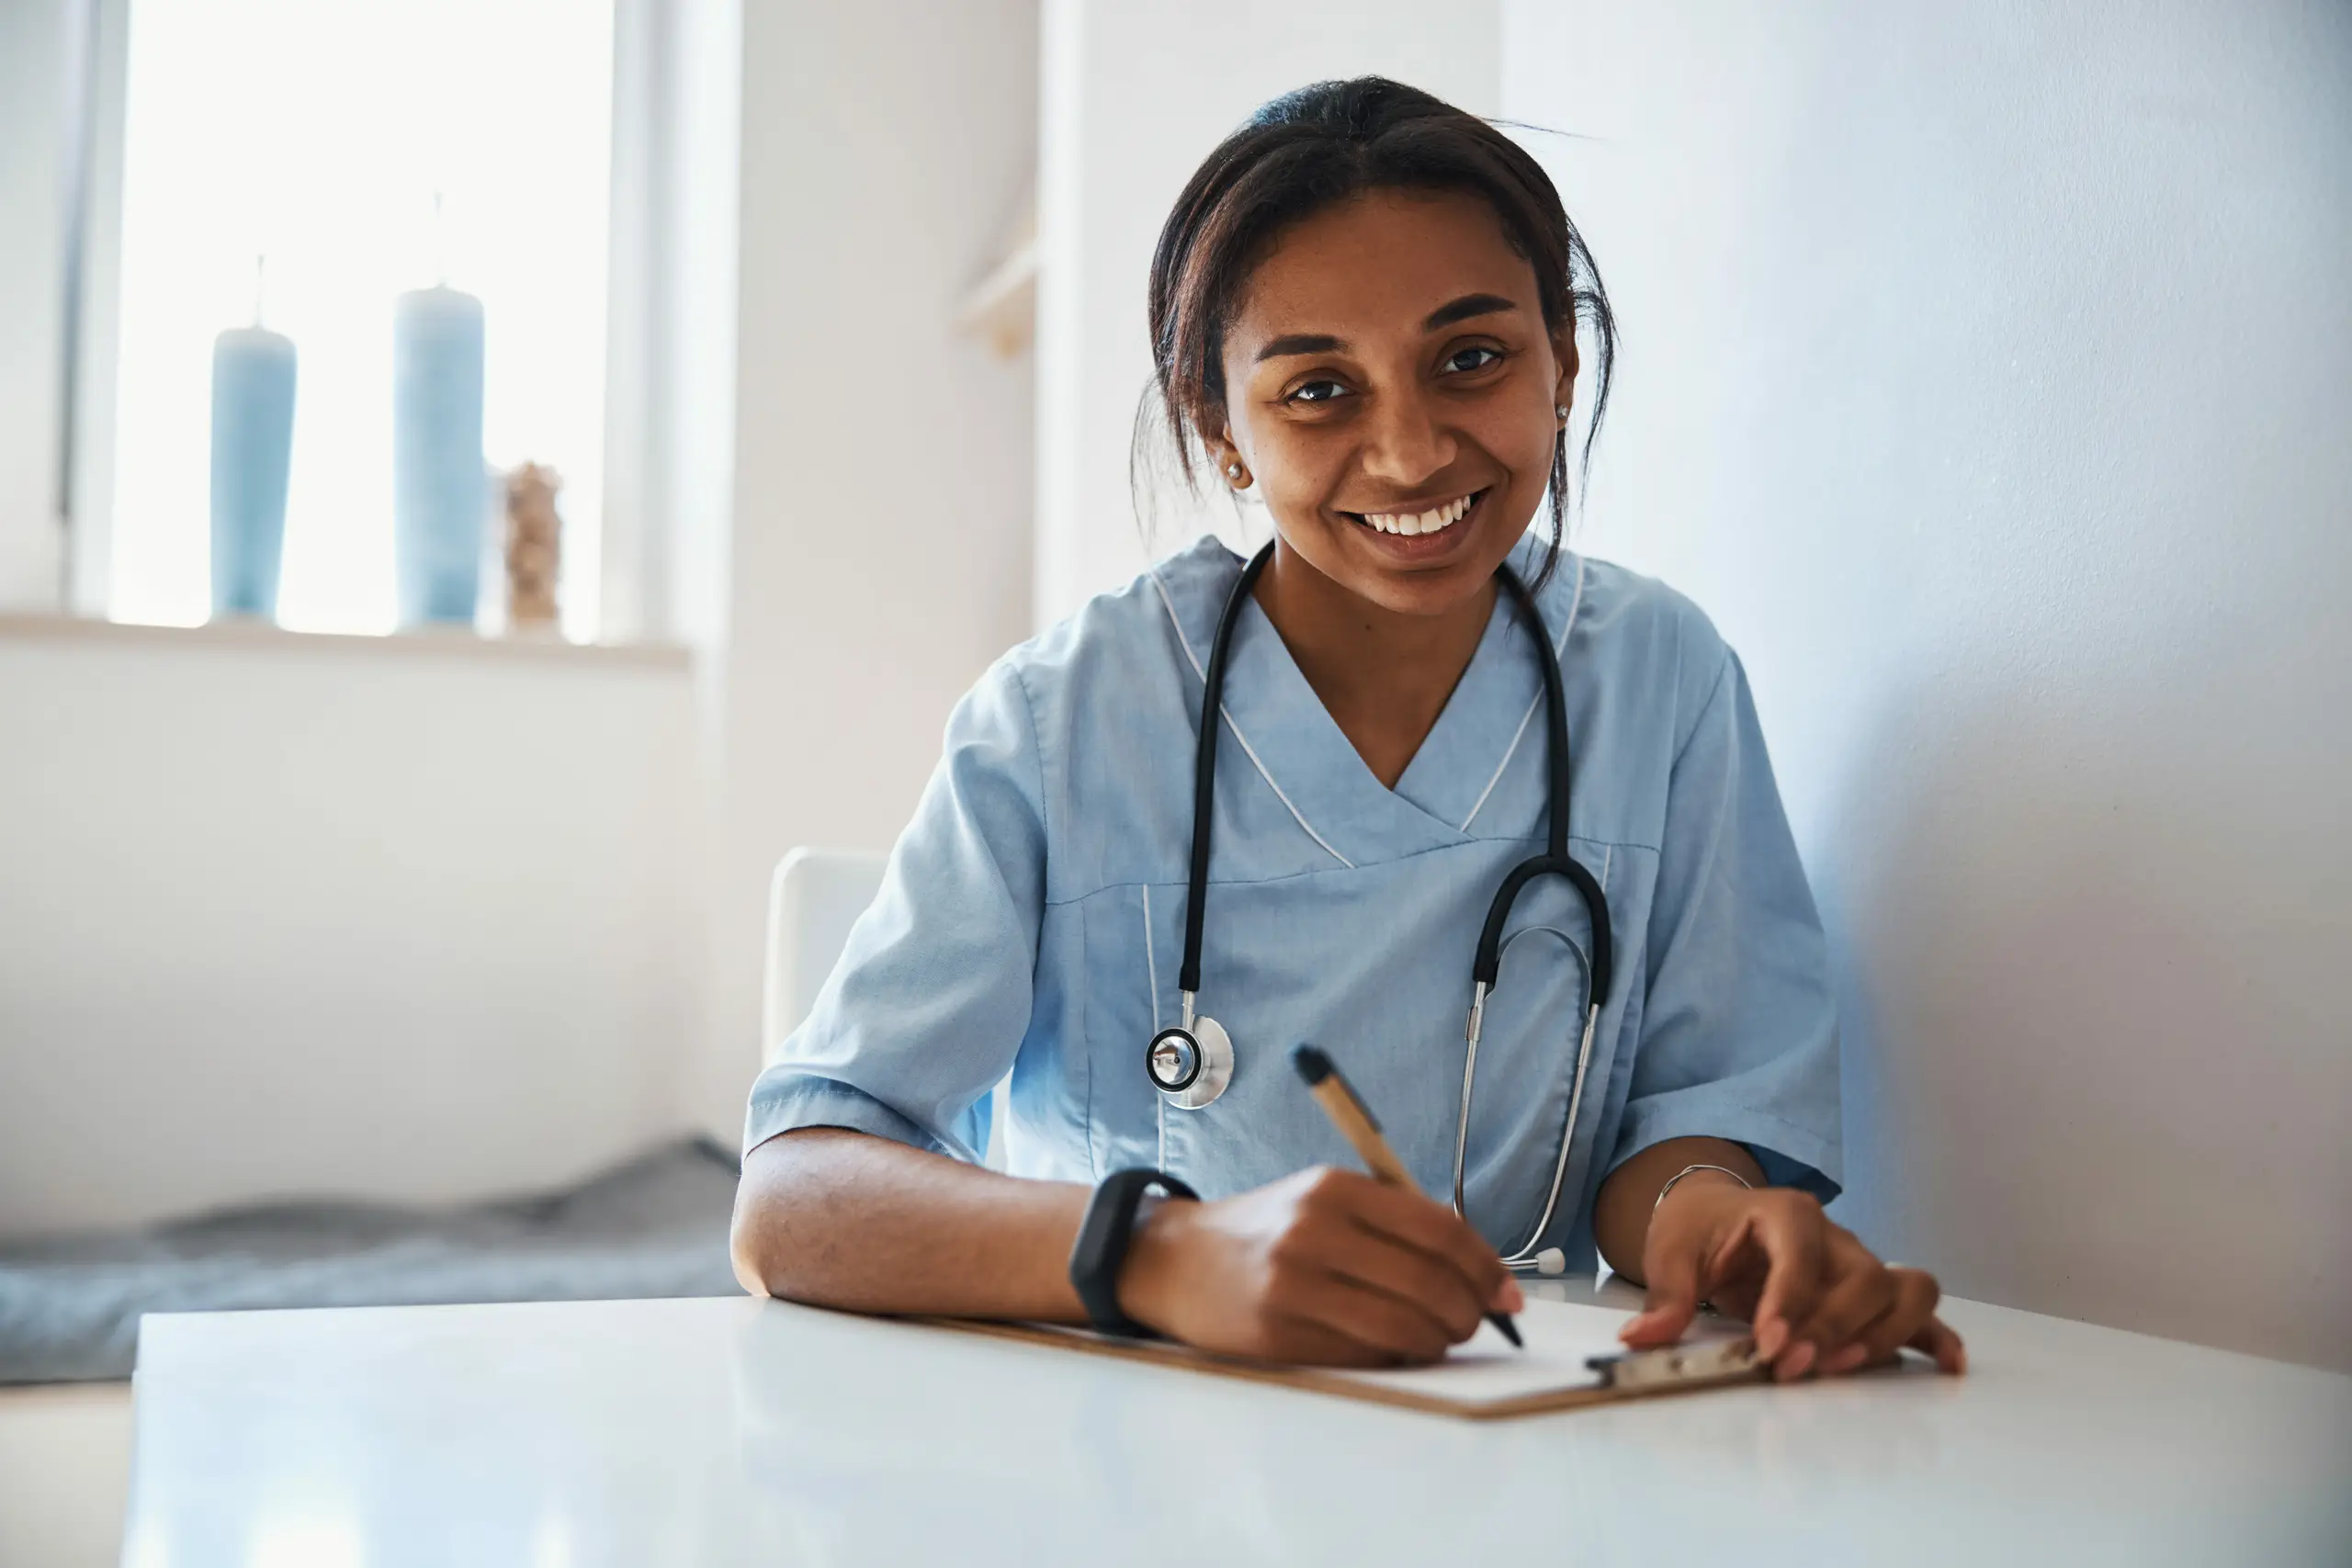 Cheerful female doctor doing paperwork in a clinic, highlighting healthcare communication, compliance management systems, integrated healthcare, and medical inventory management to reduce paperwork and simplify your medical device company.